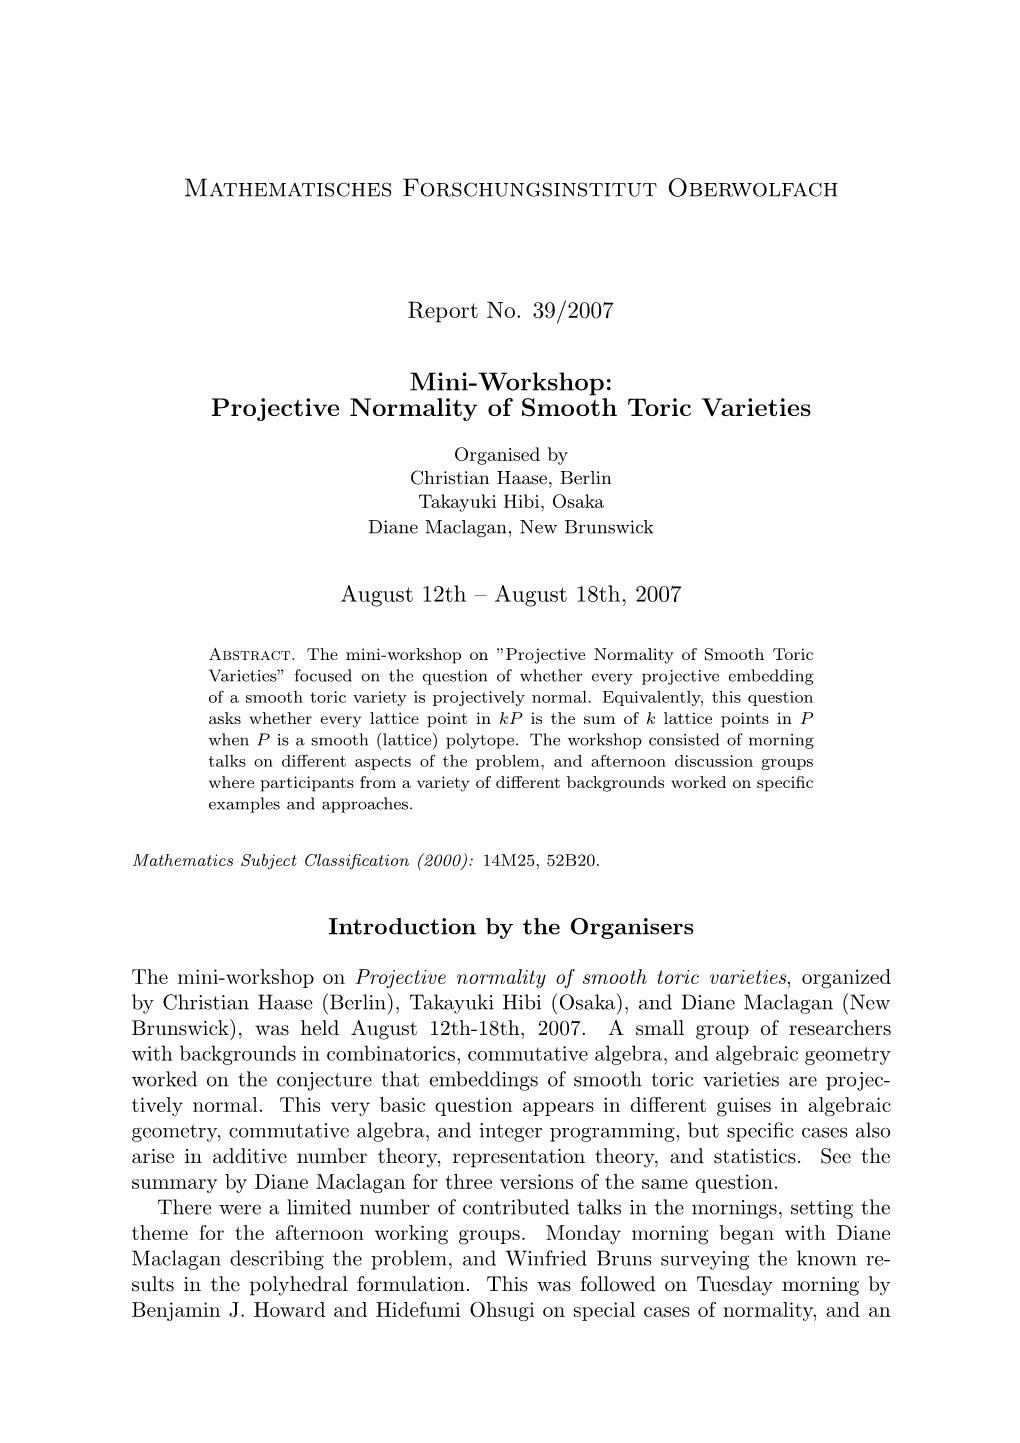 Projective Normality of Smooth Toric Varieties